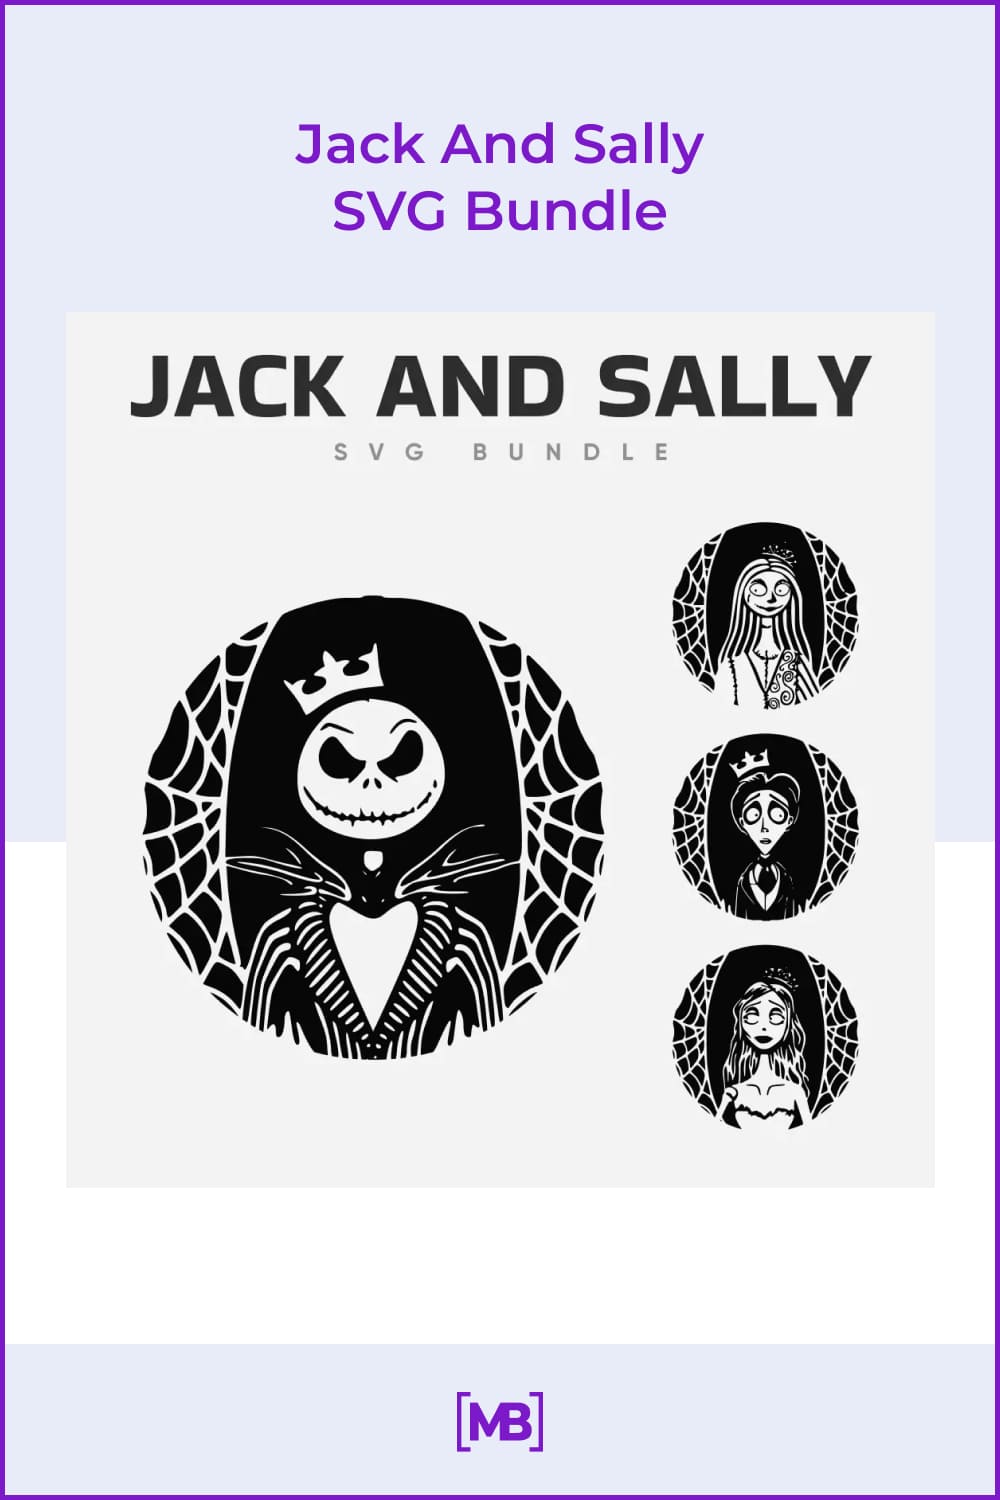 Jack and Sally images.